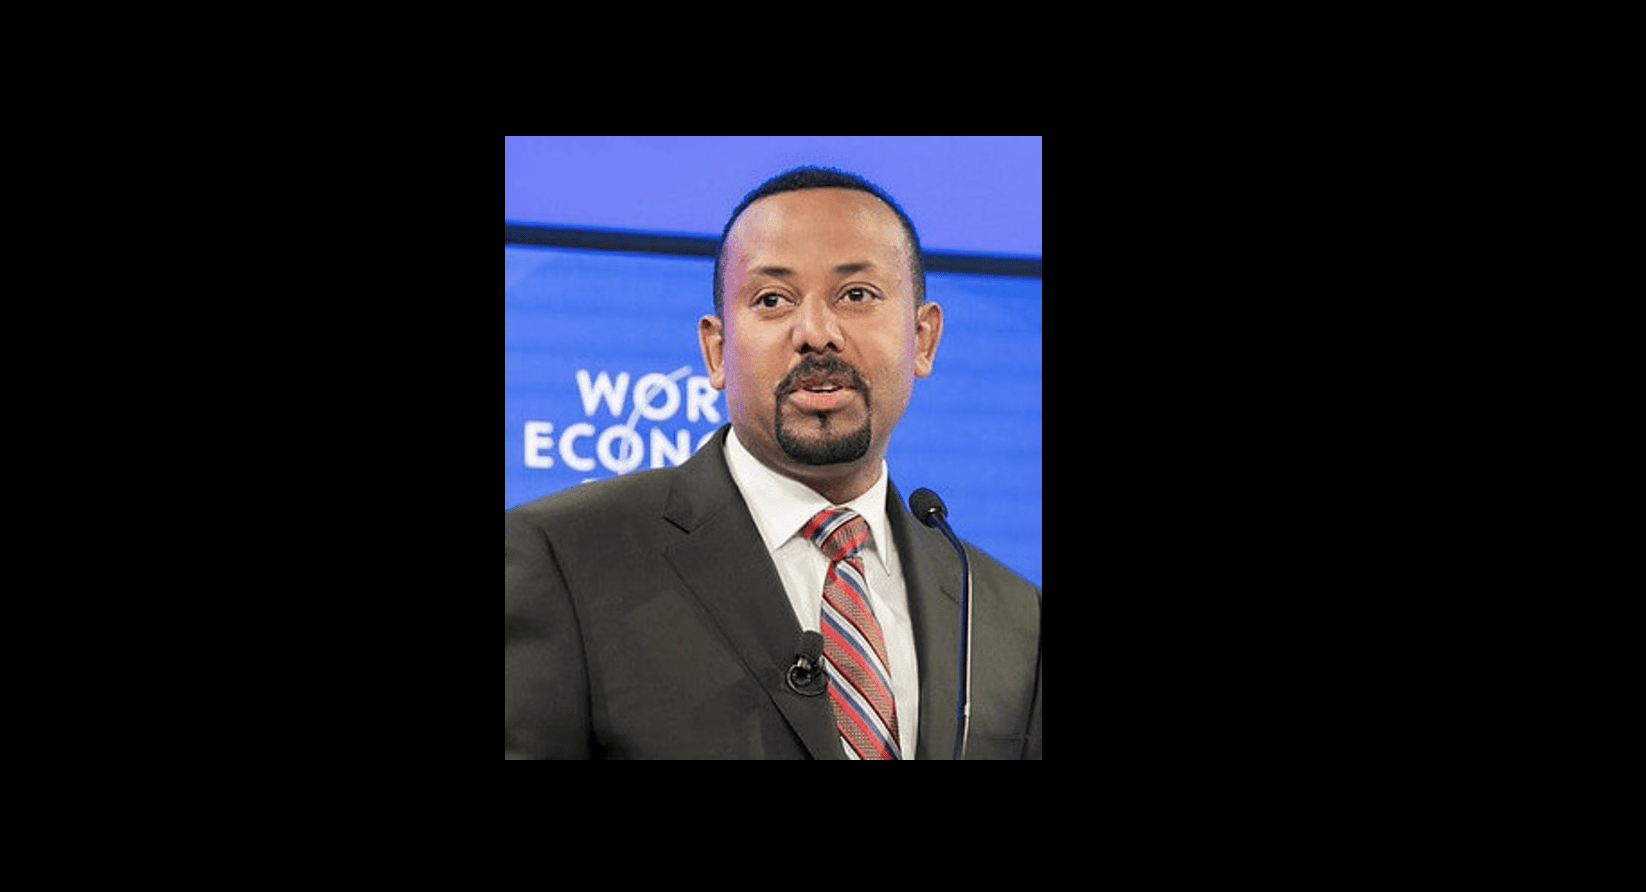 Ethiopian Prime Minister Abiy Ahmed in front of blue background, with words "World Economic Forum" in white.